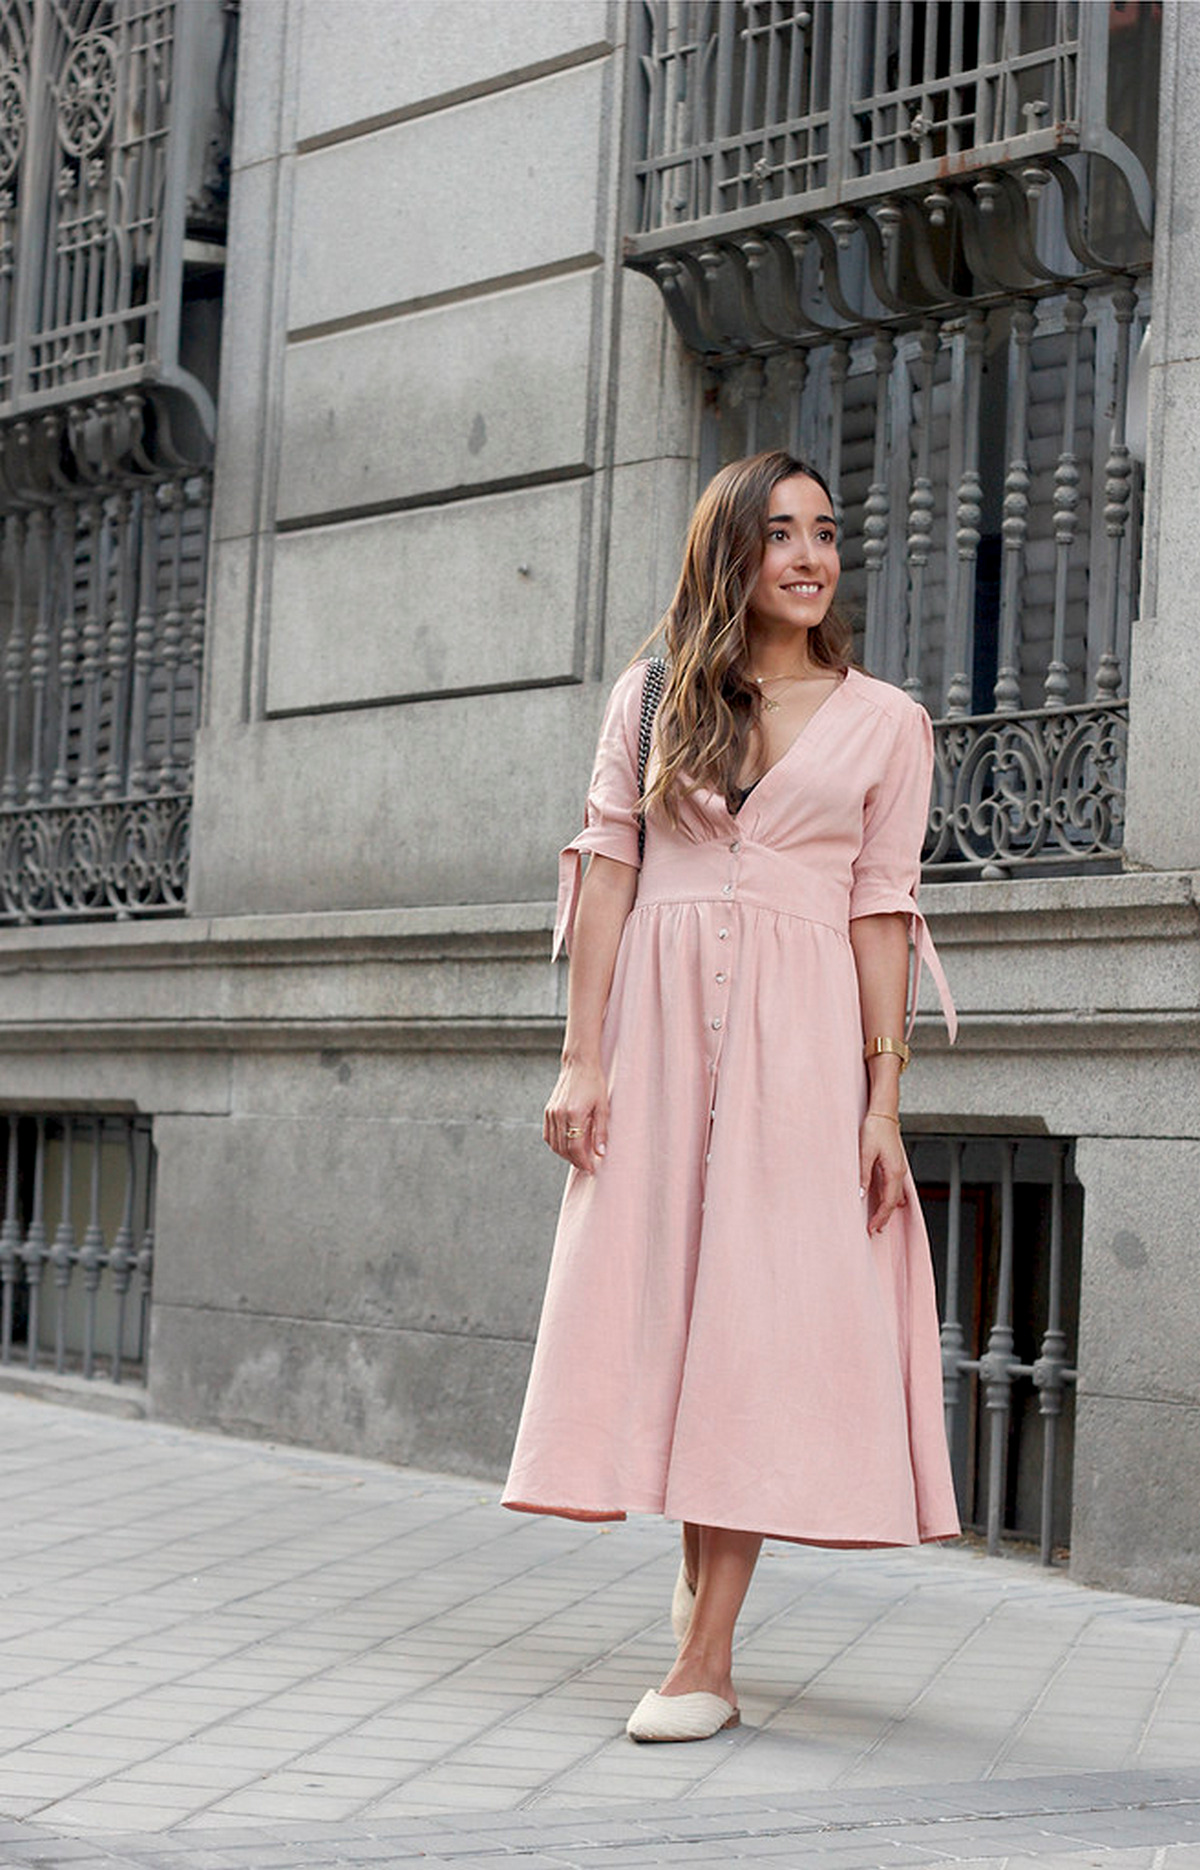 Candy Pink Dress and Nude Mules